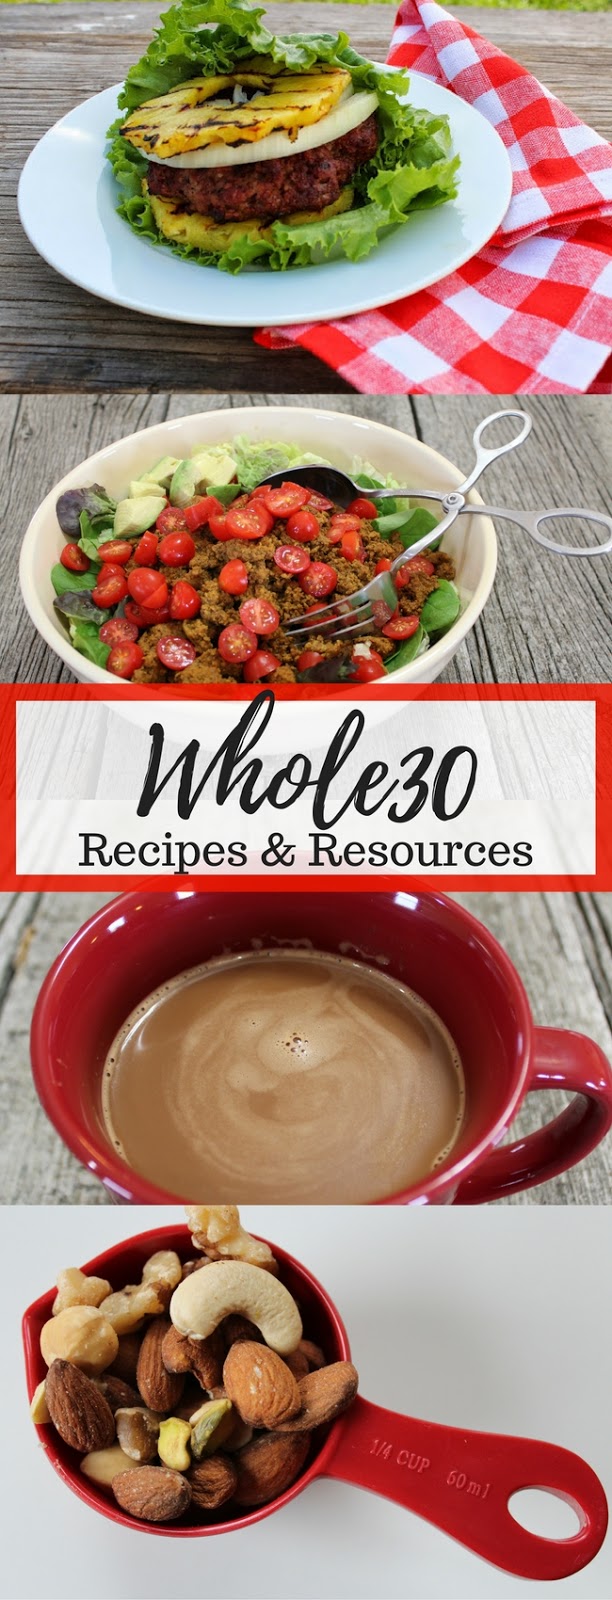 Whole30 Recipes and Resources